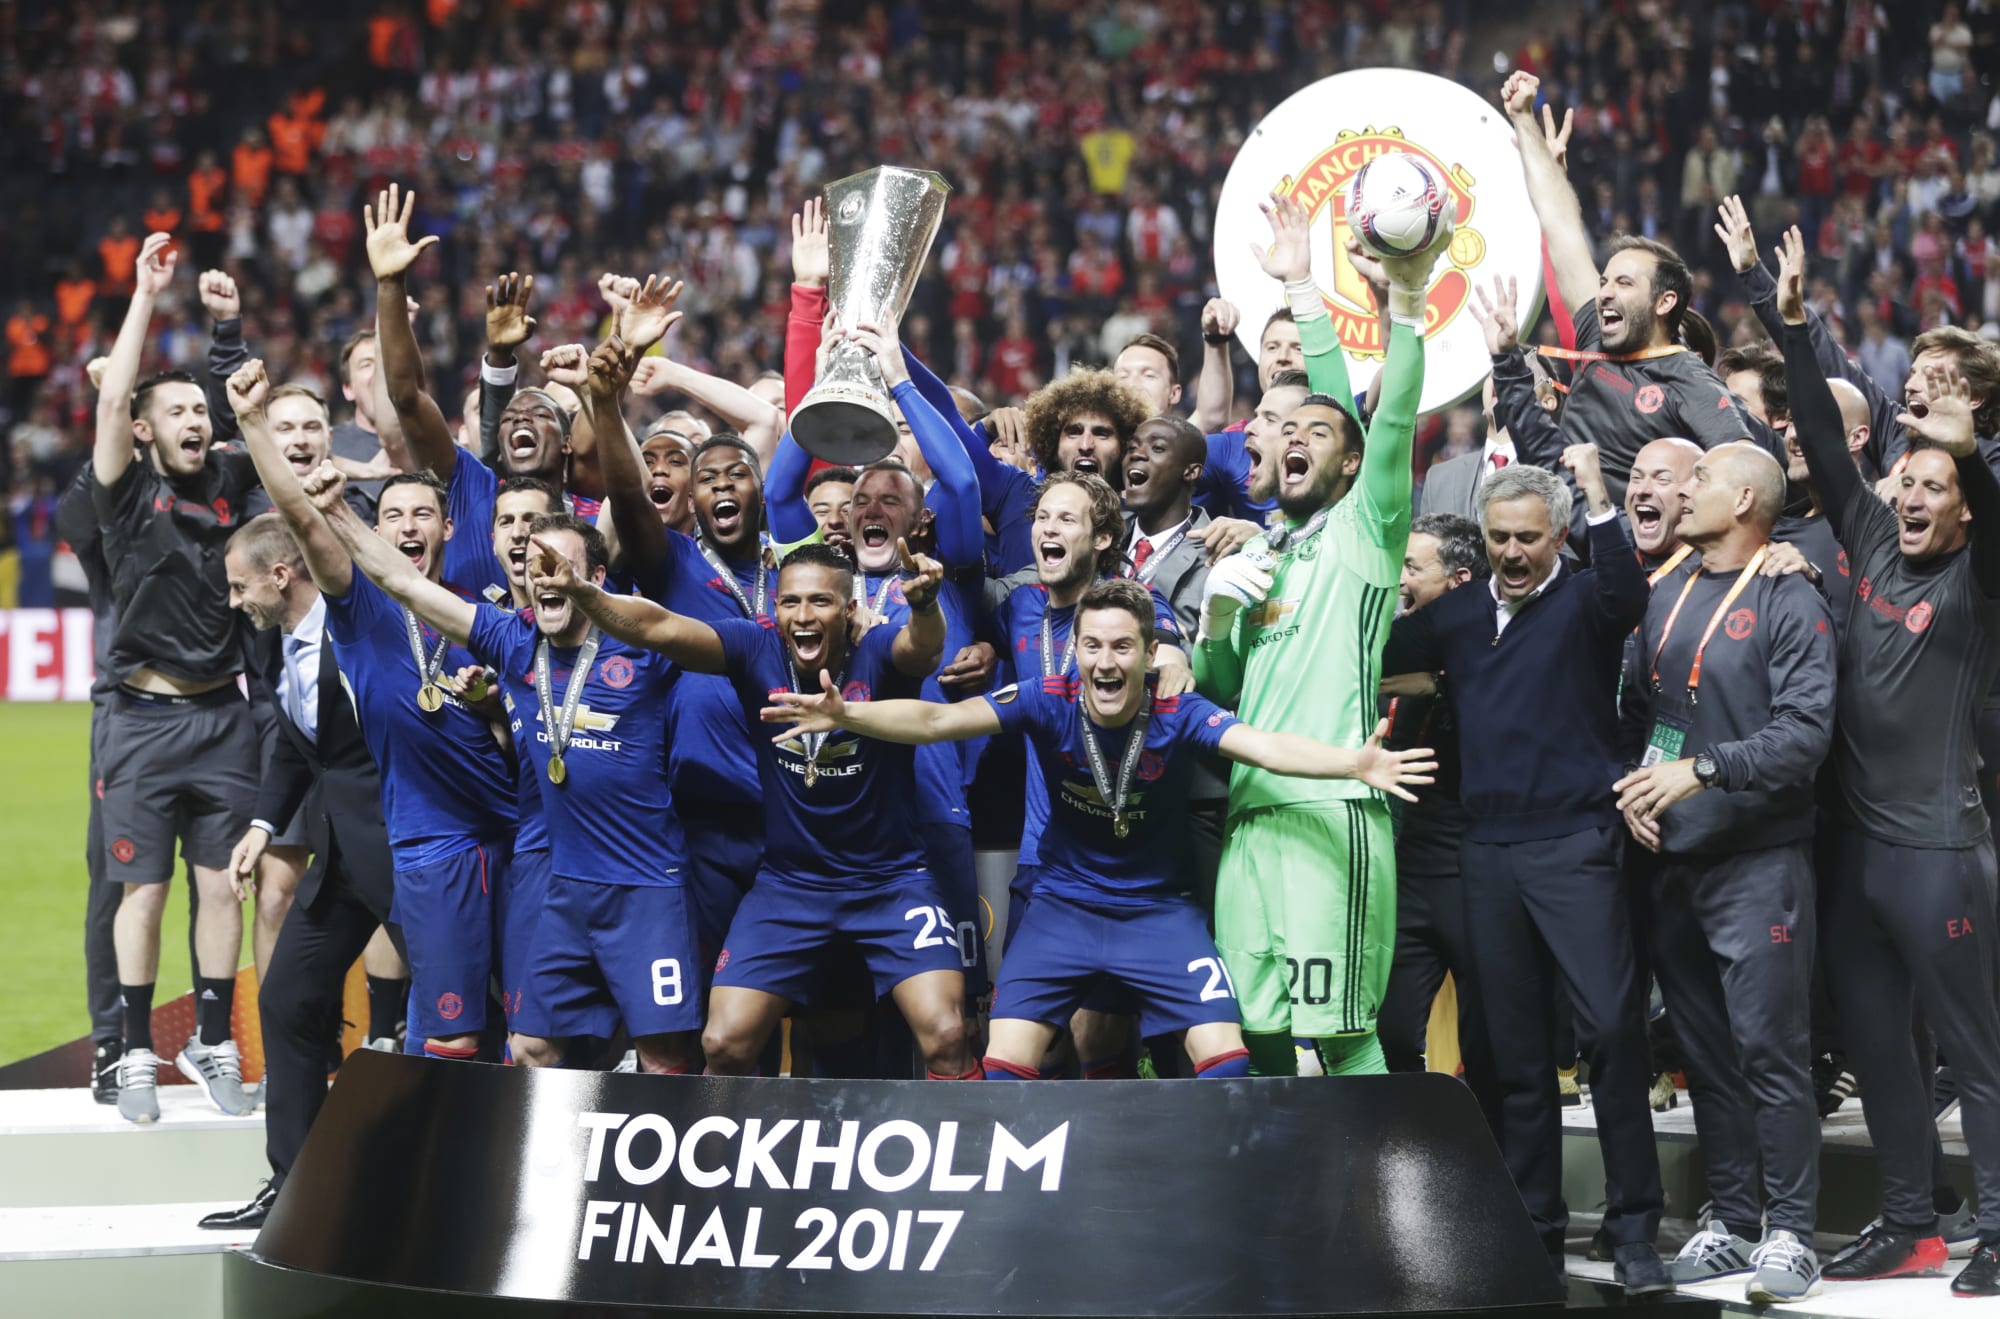 Manchester United win the Europa League to secure a Champions League place